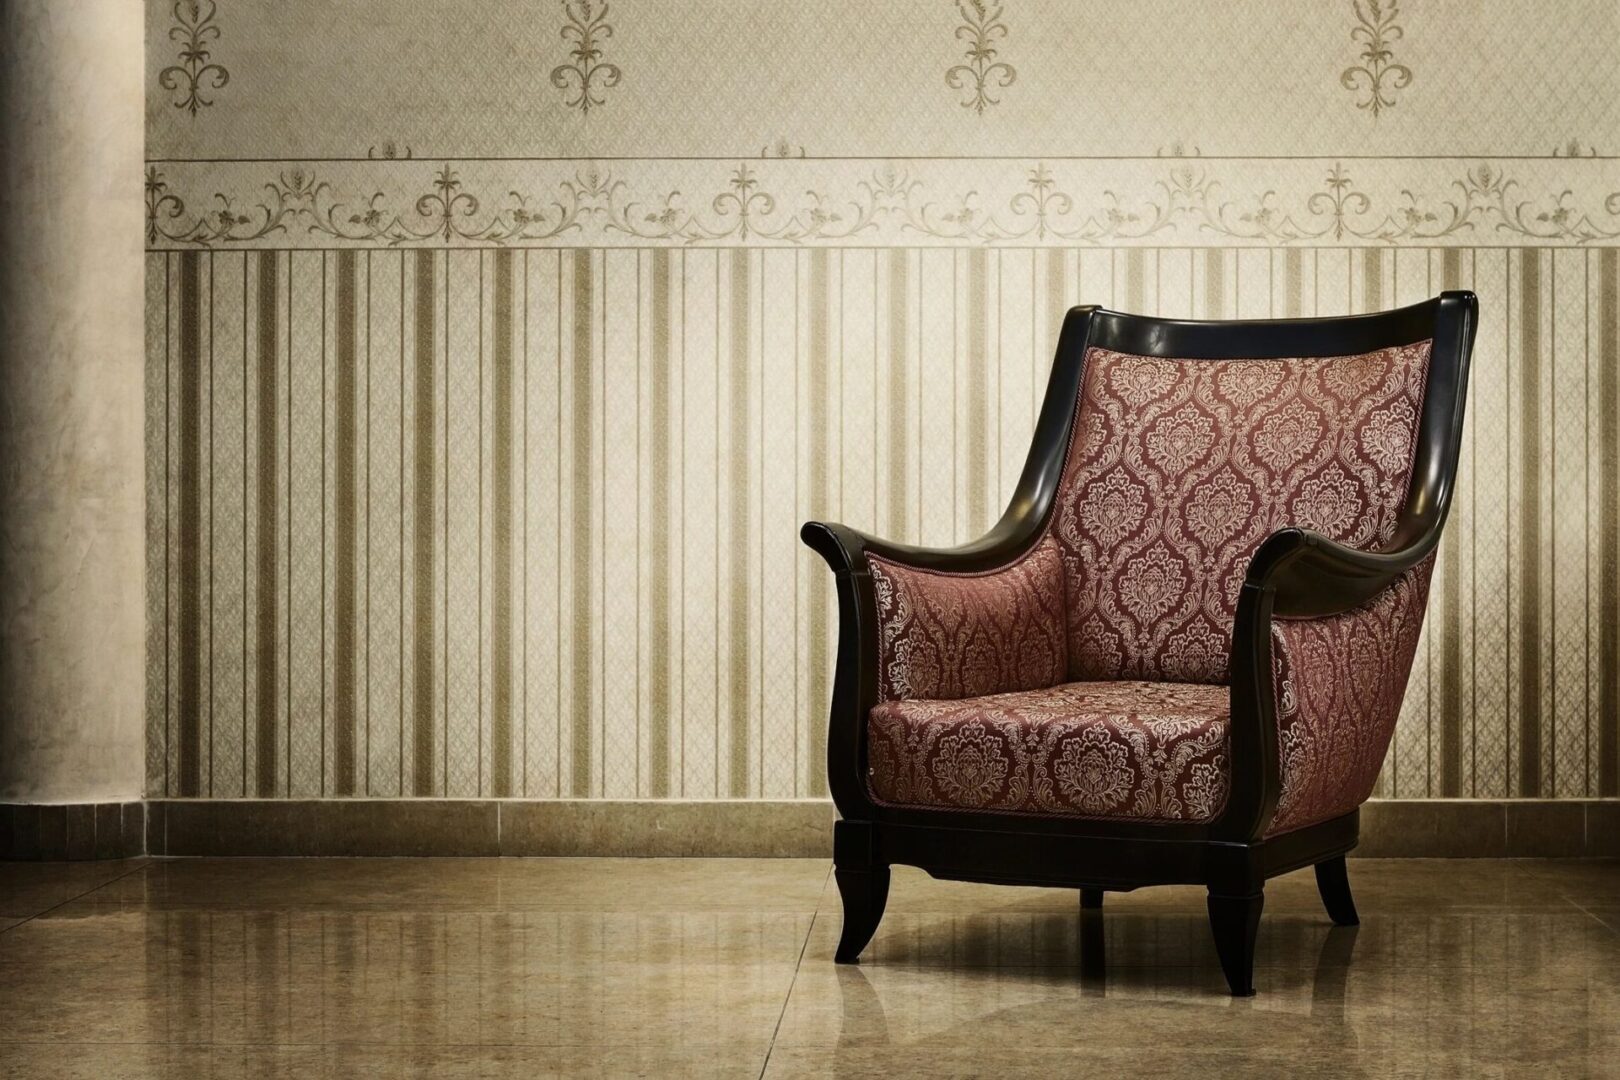 An old chair in a room with a patterned wall.